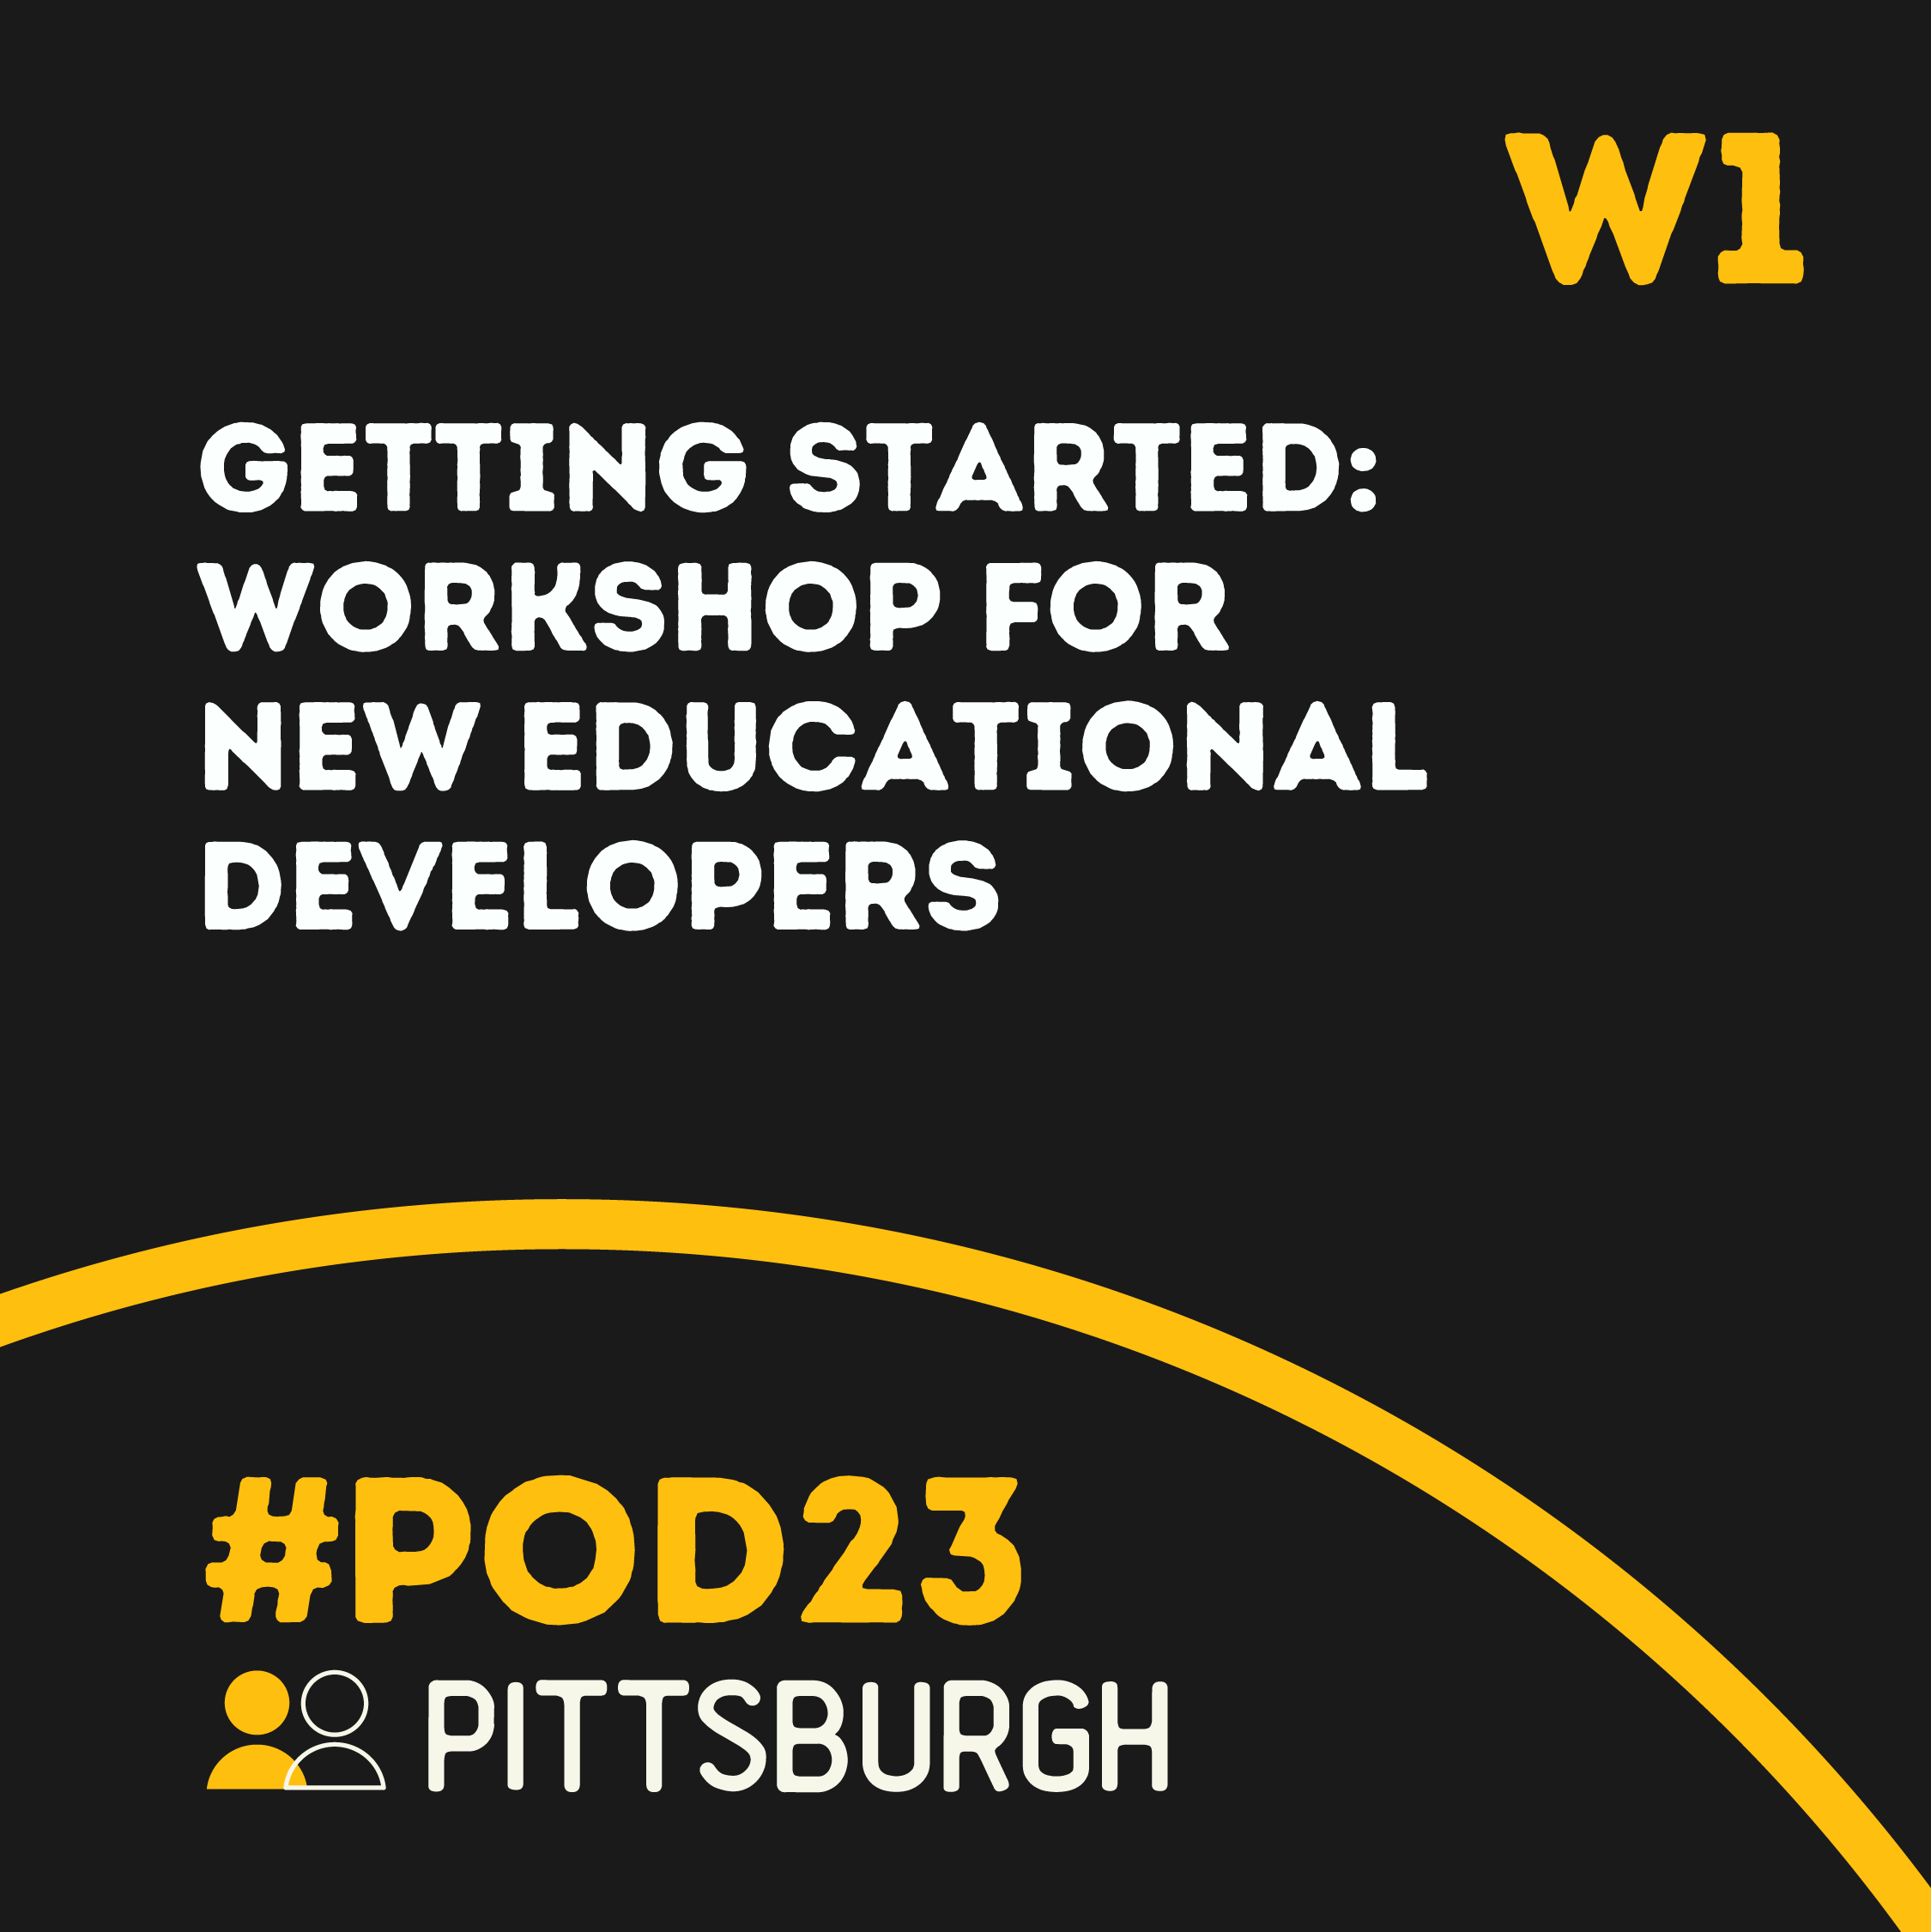 #POD23 W1: Getting Started Workshop for New Educational Developers